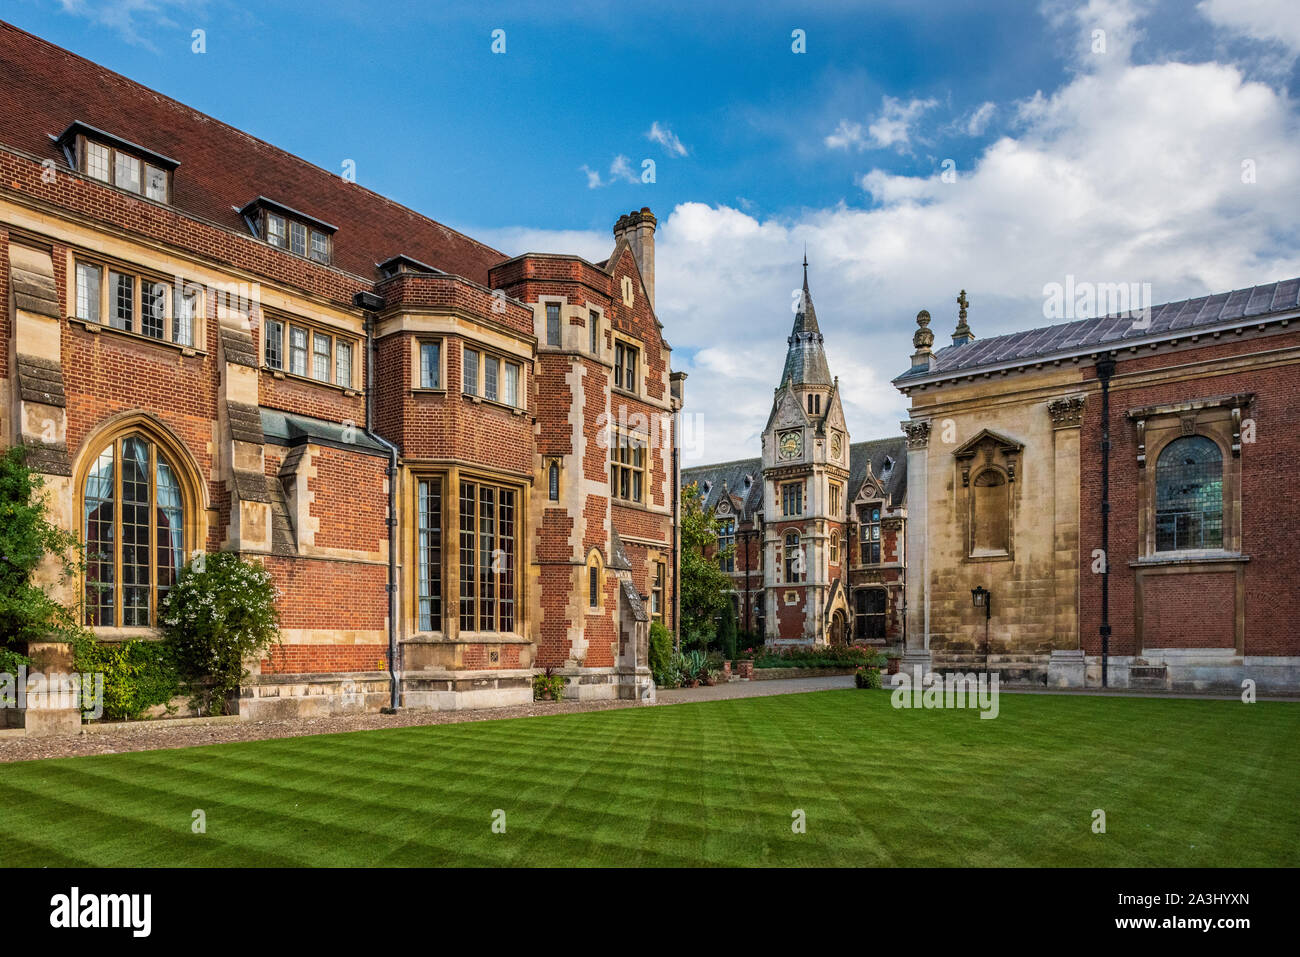 Pembroke College Cambridge, University of Cambridge - The Old Court of Pembroke College with the clock tower, founded in 1347, in central Cambridge UK Stock Photo